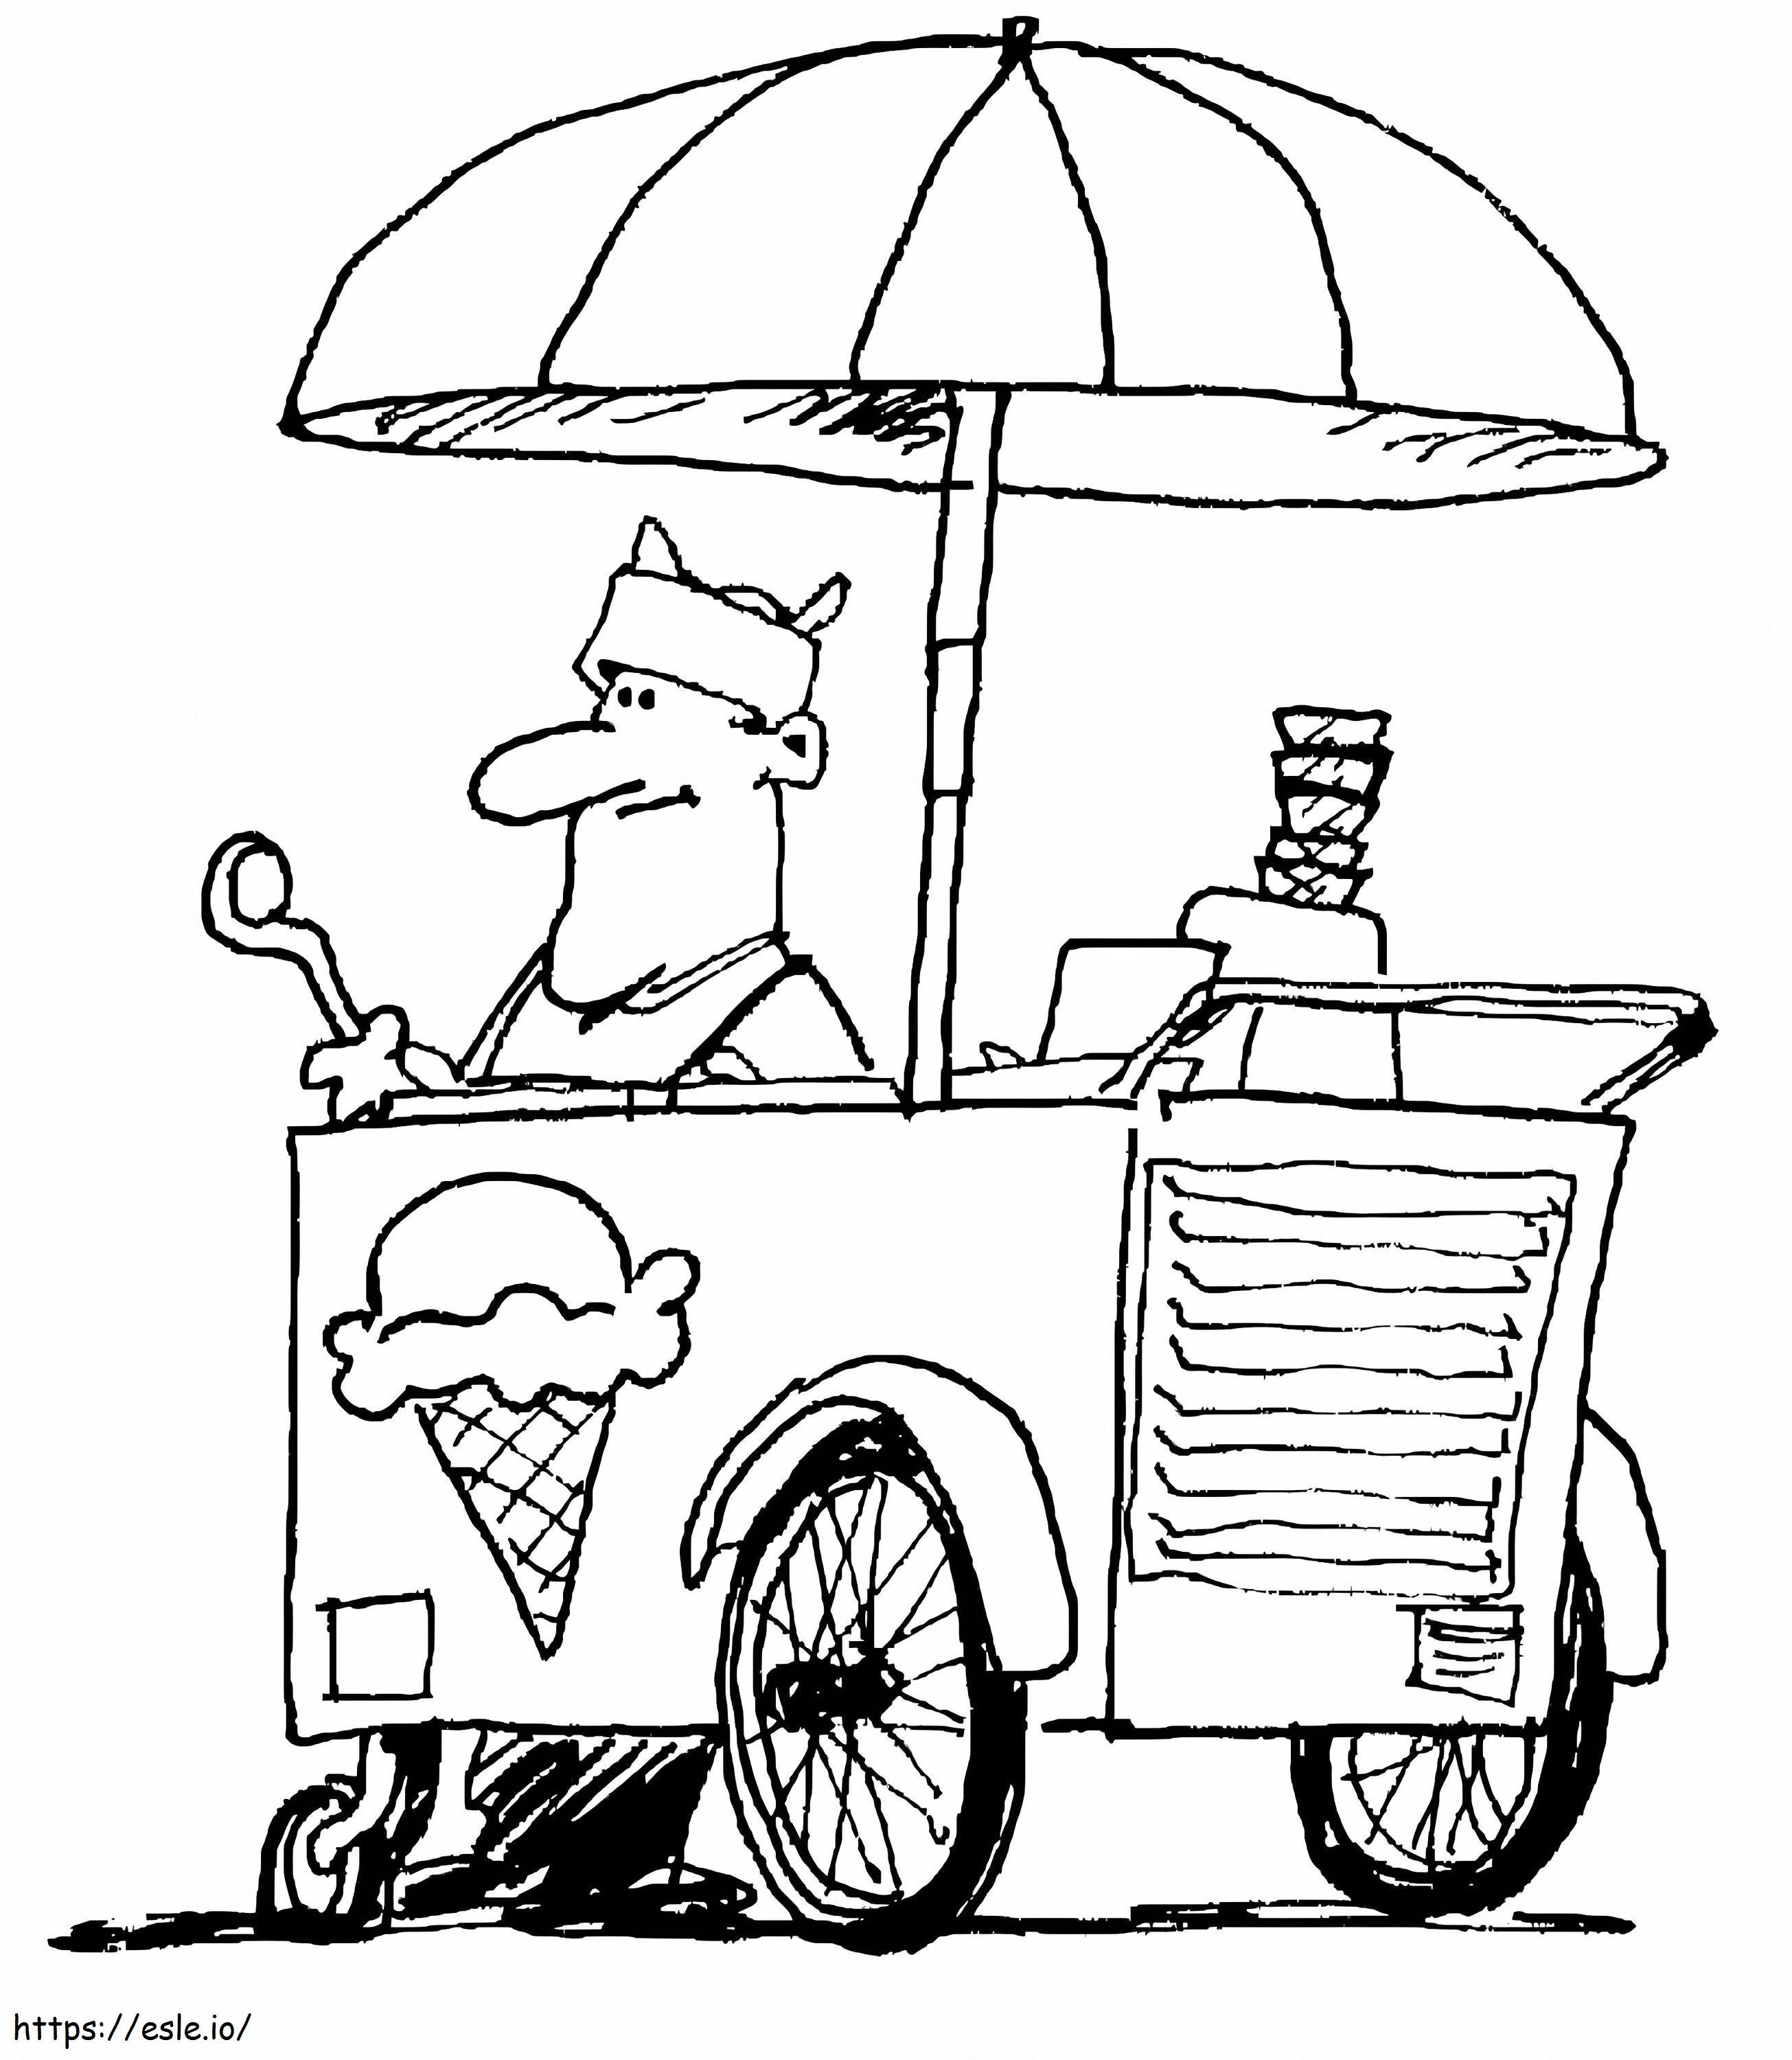 Ice Cream Man coloring page